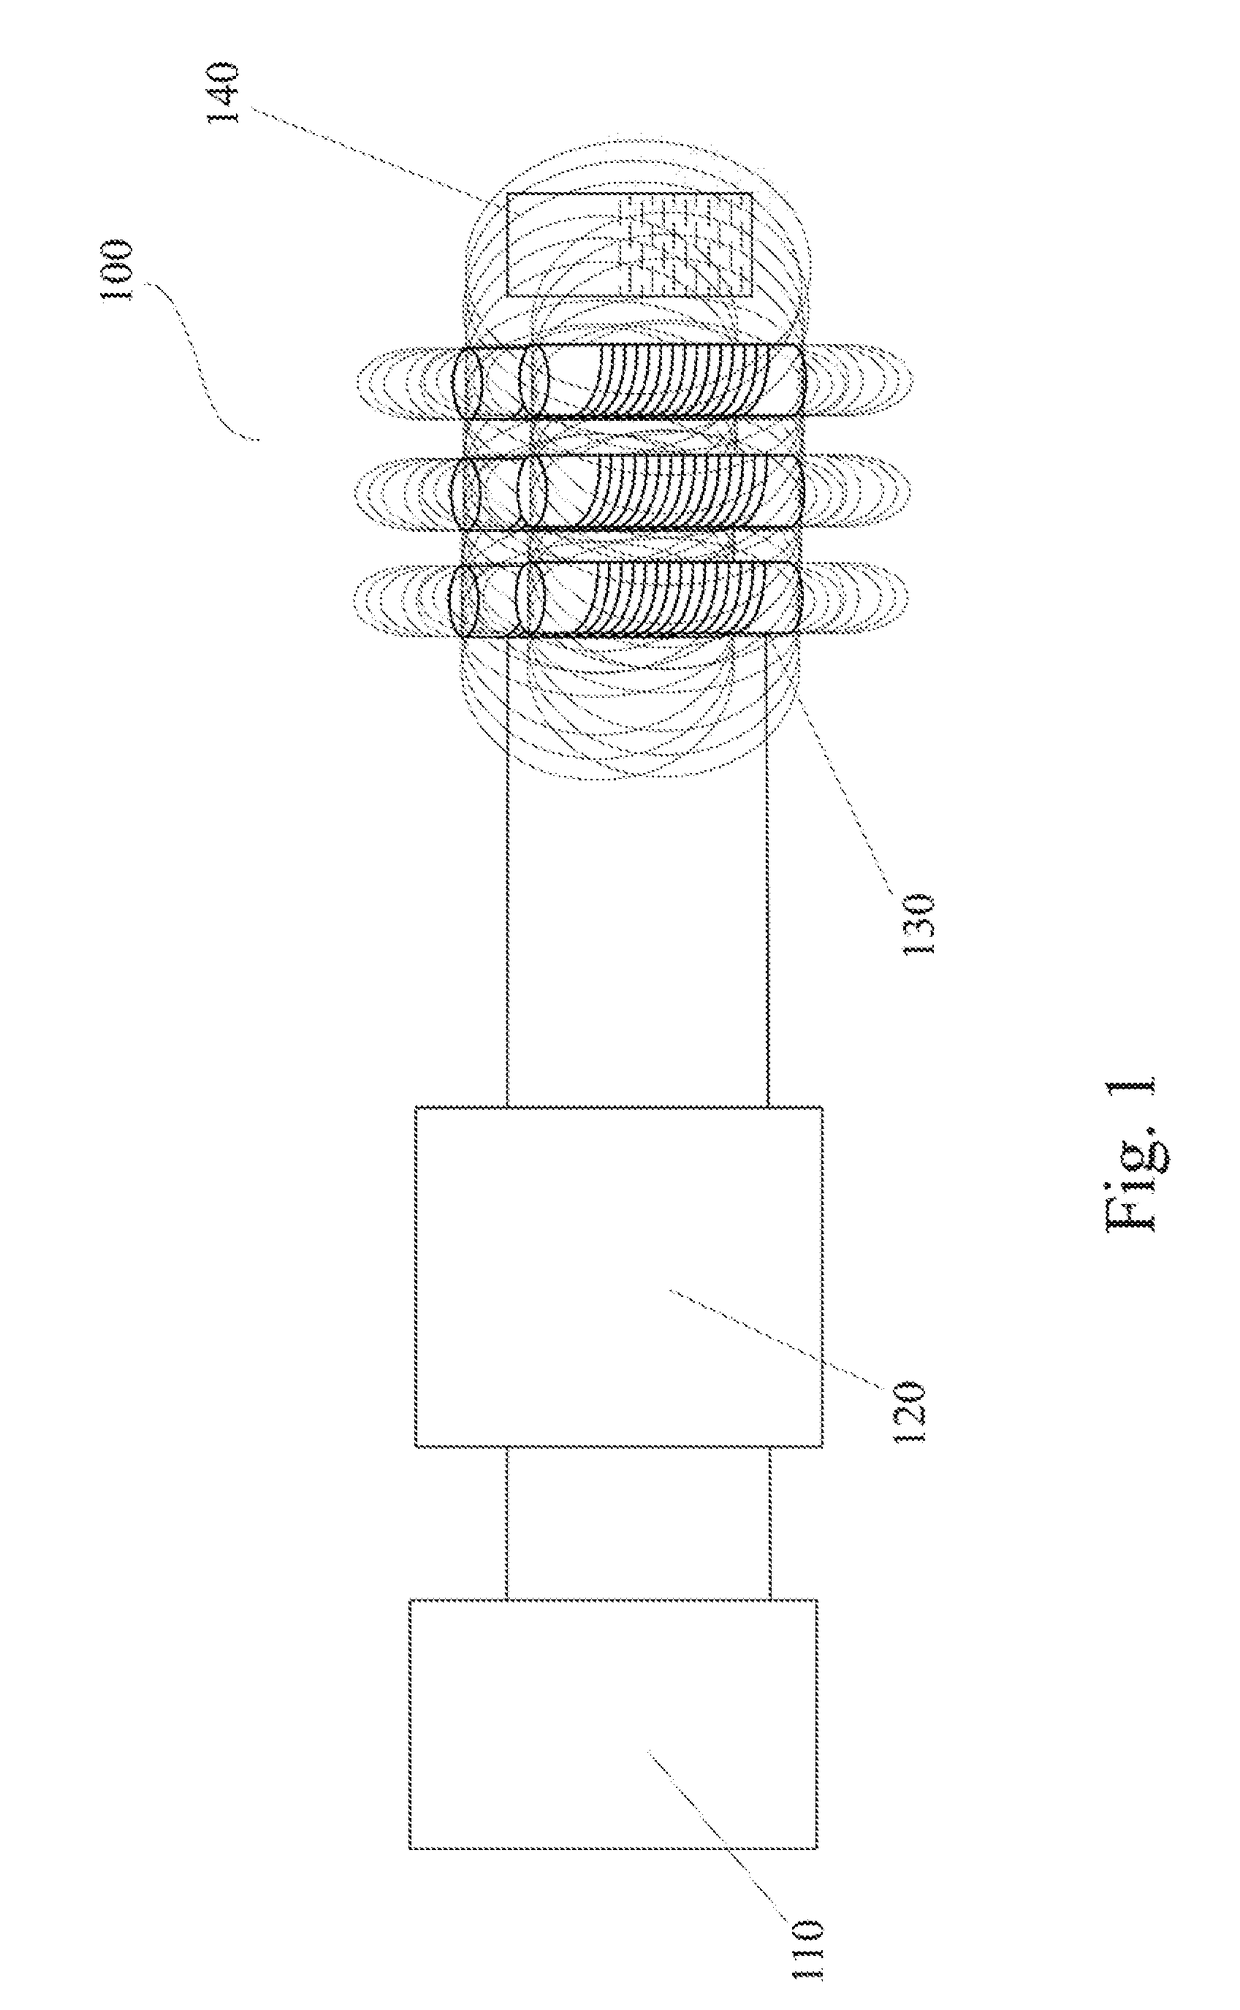 System and method for imparting electromagnetic energy into water and use thereof